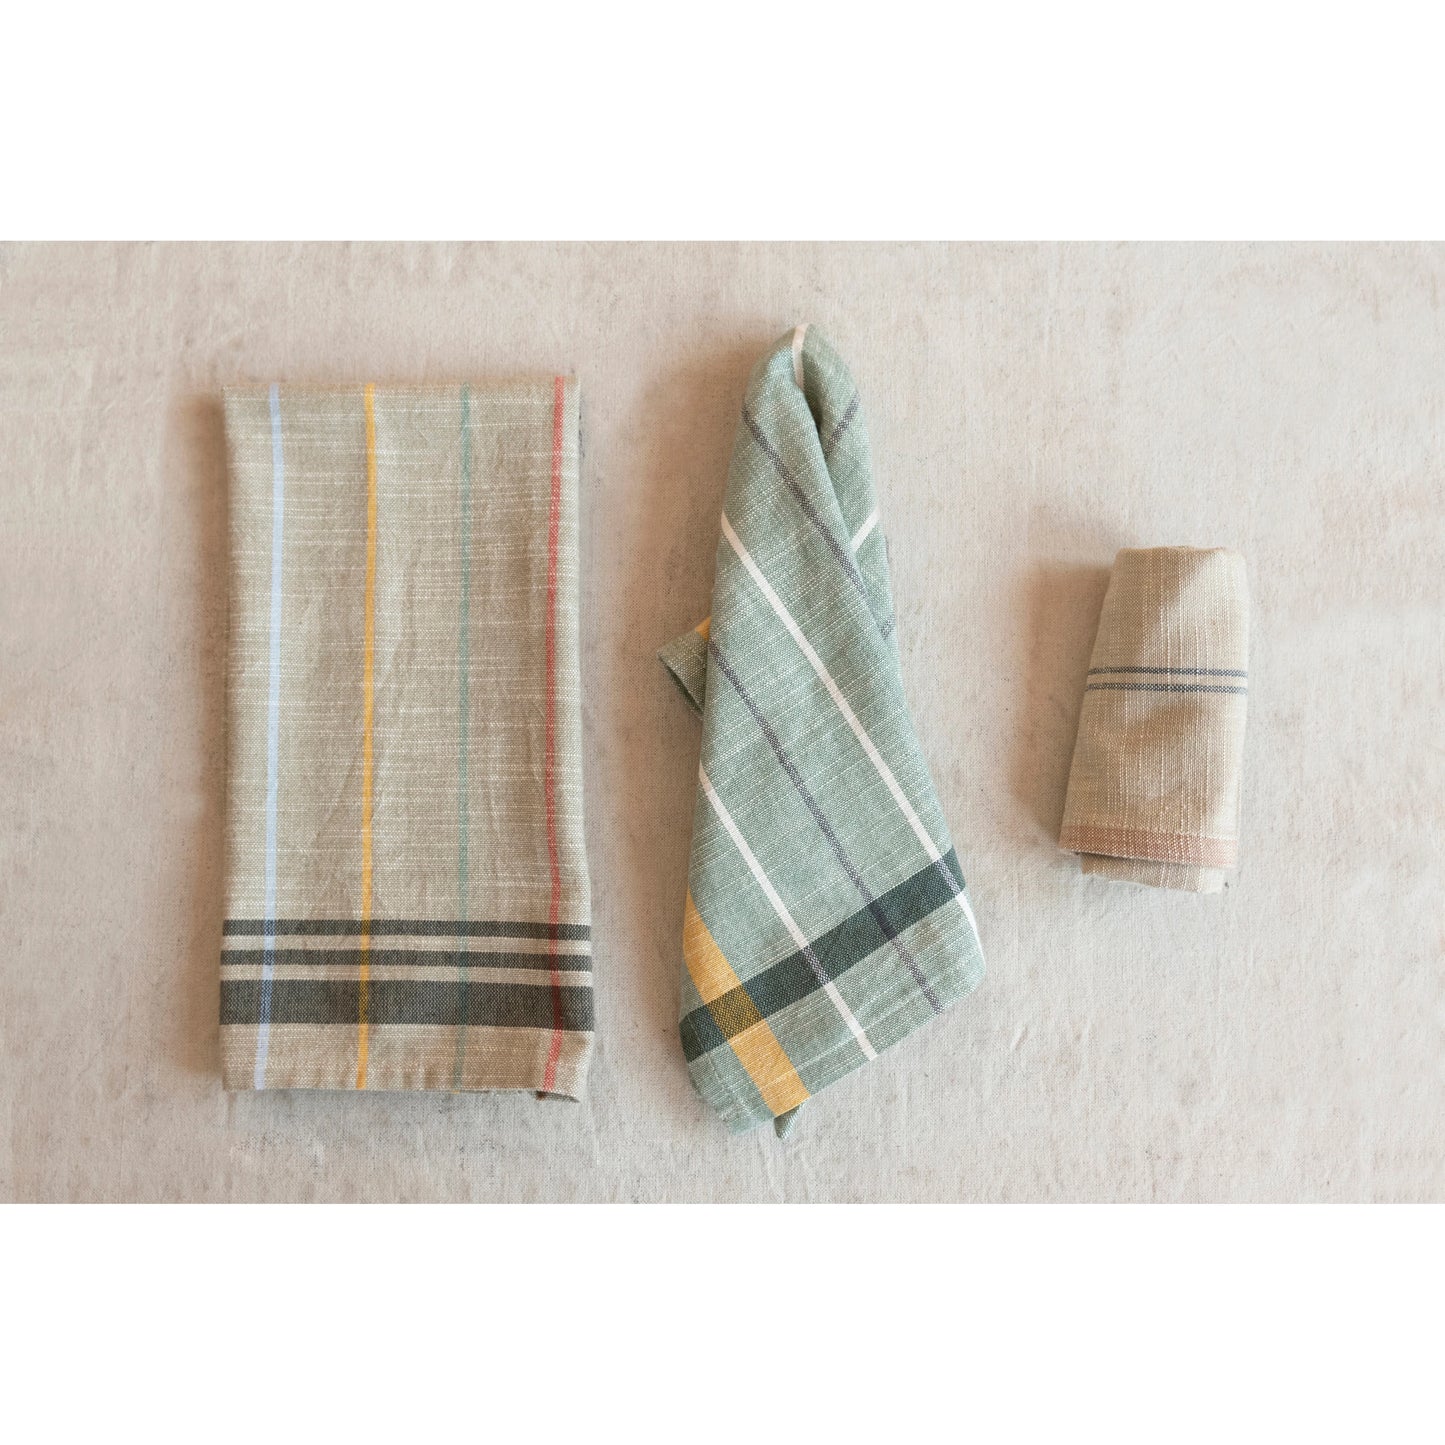 3 assorted striped towels folded or draped on a grey table.